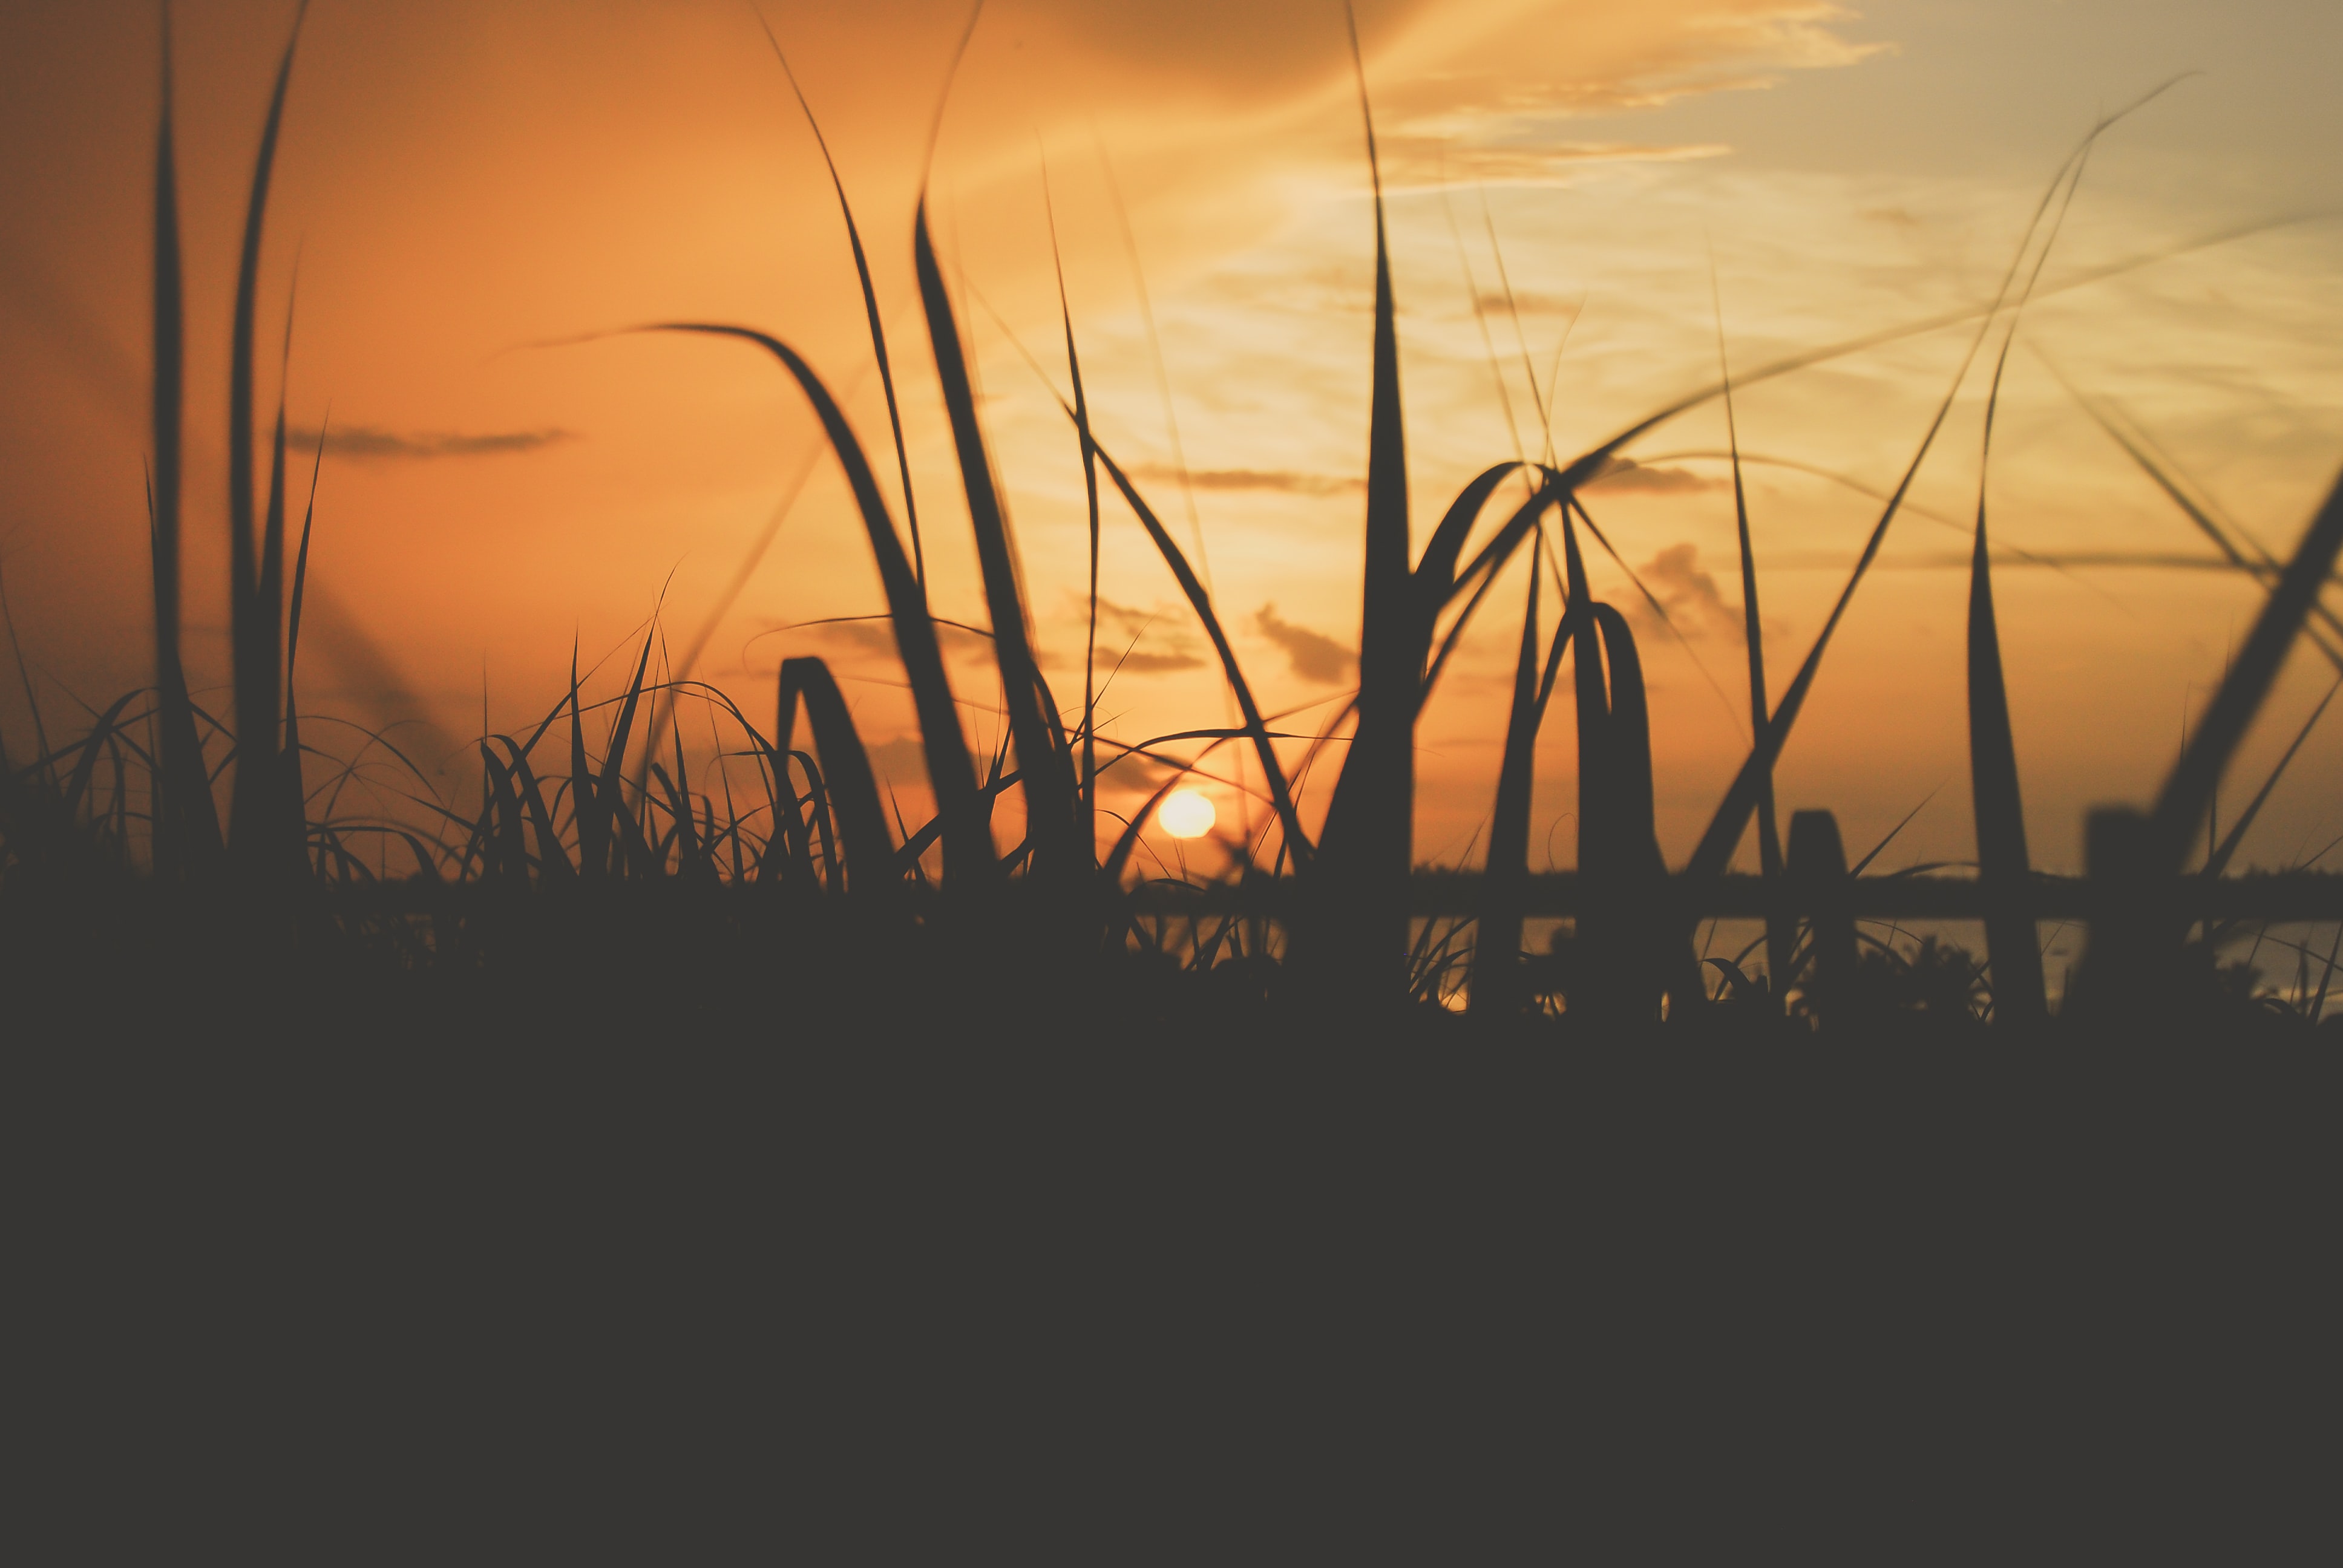 photo of sugar cane stocks with sun setting in the background